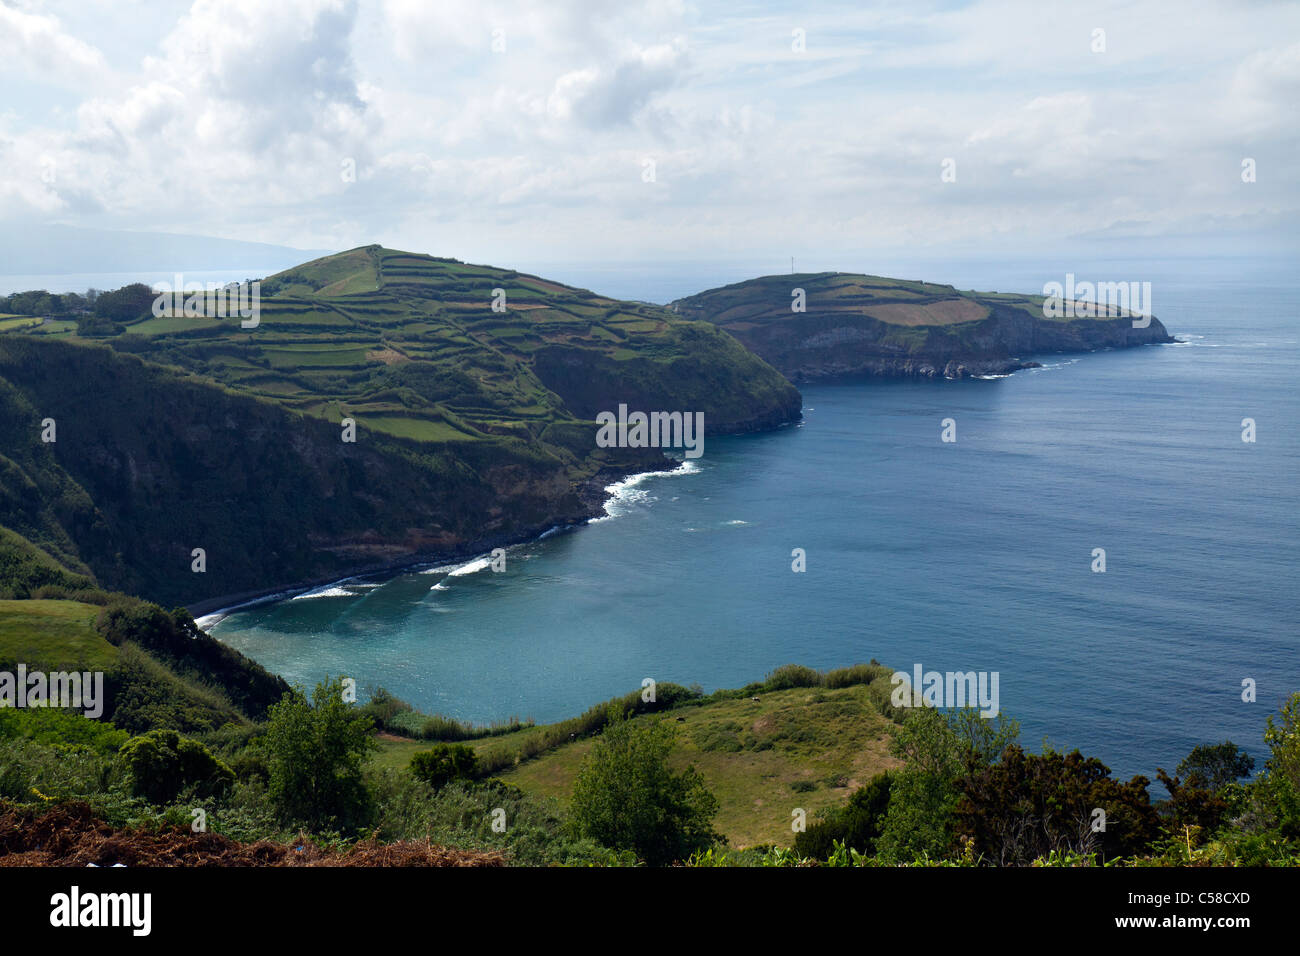 Looking west from St Iria viewpoint, São Miguel island, Azores. Stock Photo